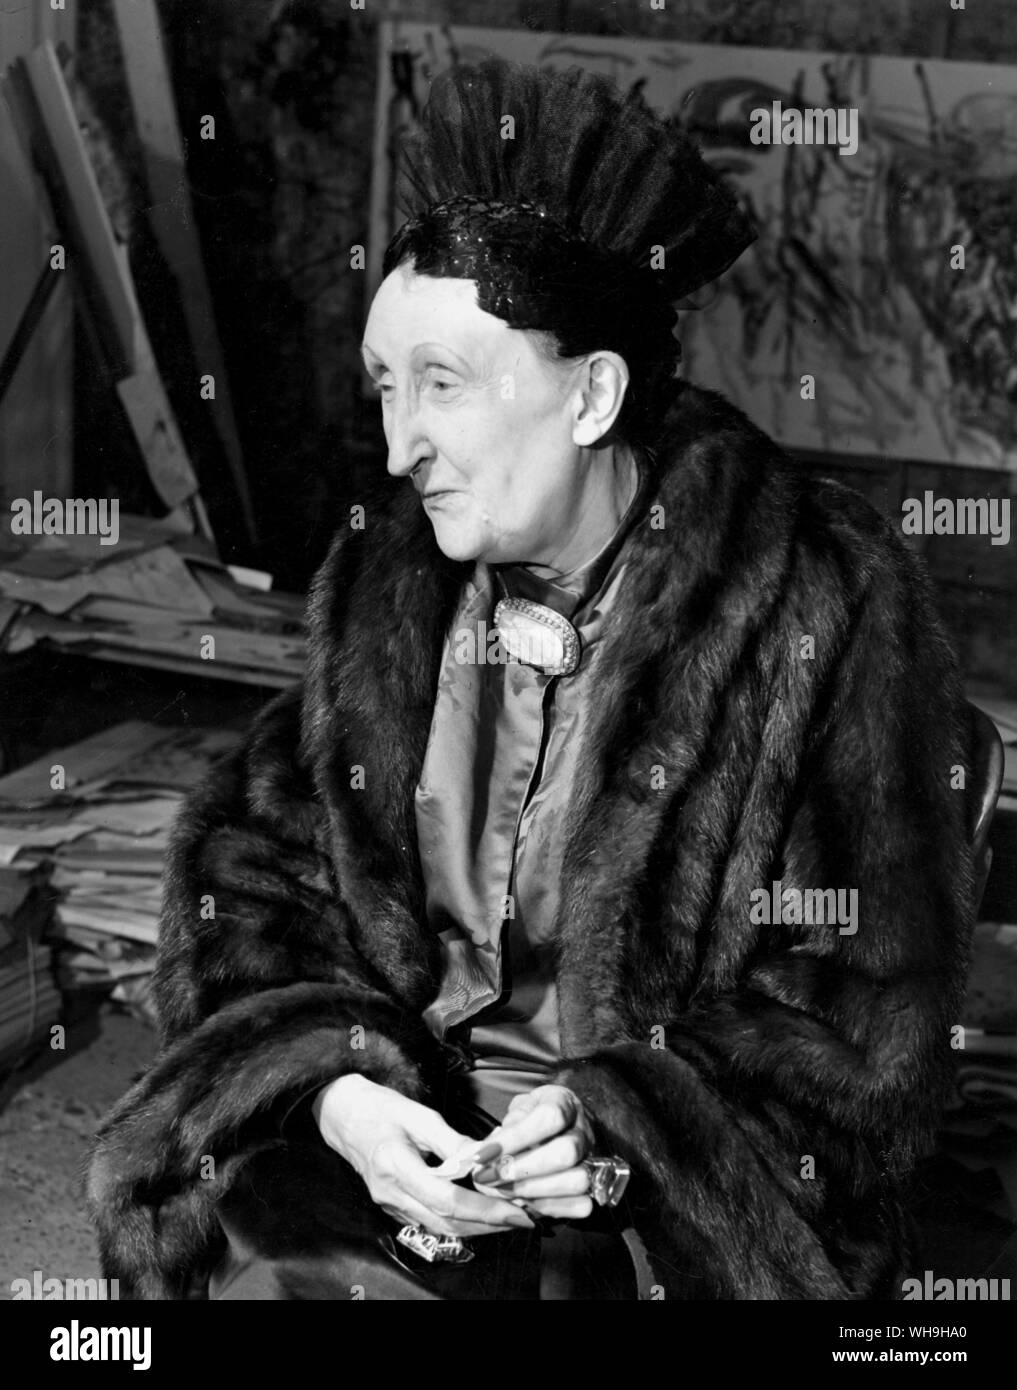 April 1959: Dame Edith Sitwell (1887-1965). Englischer Dichter. Stockfoto